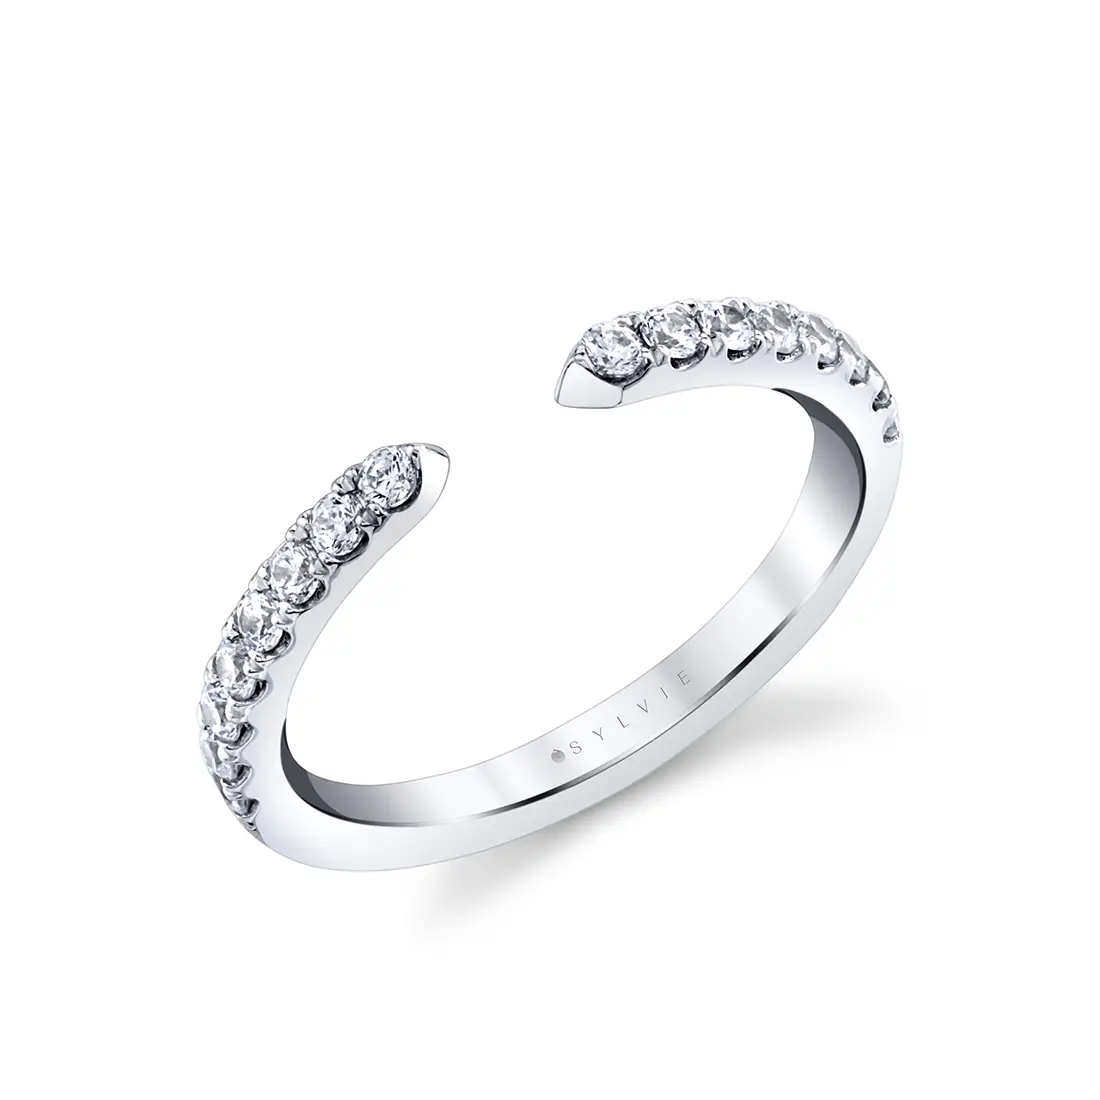 classic modern open wedding band in white gold